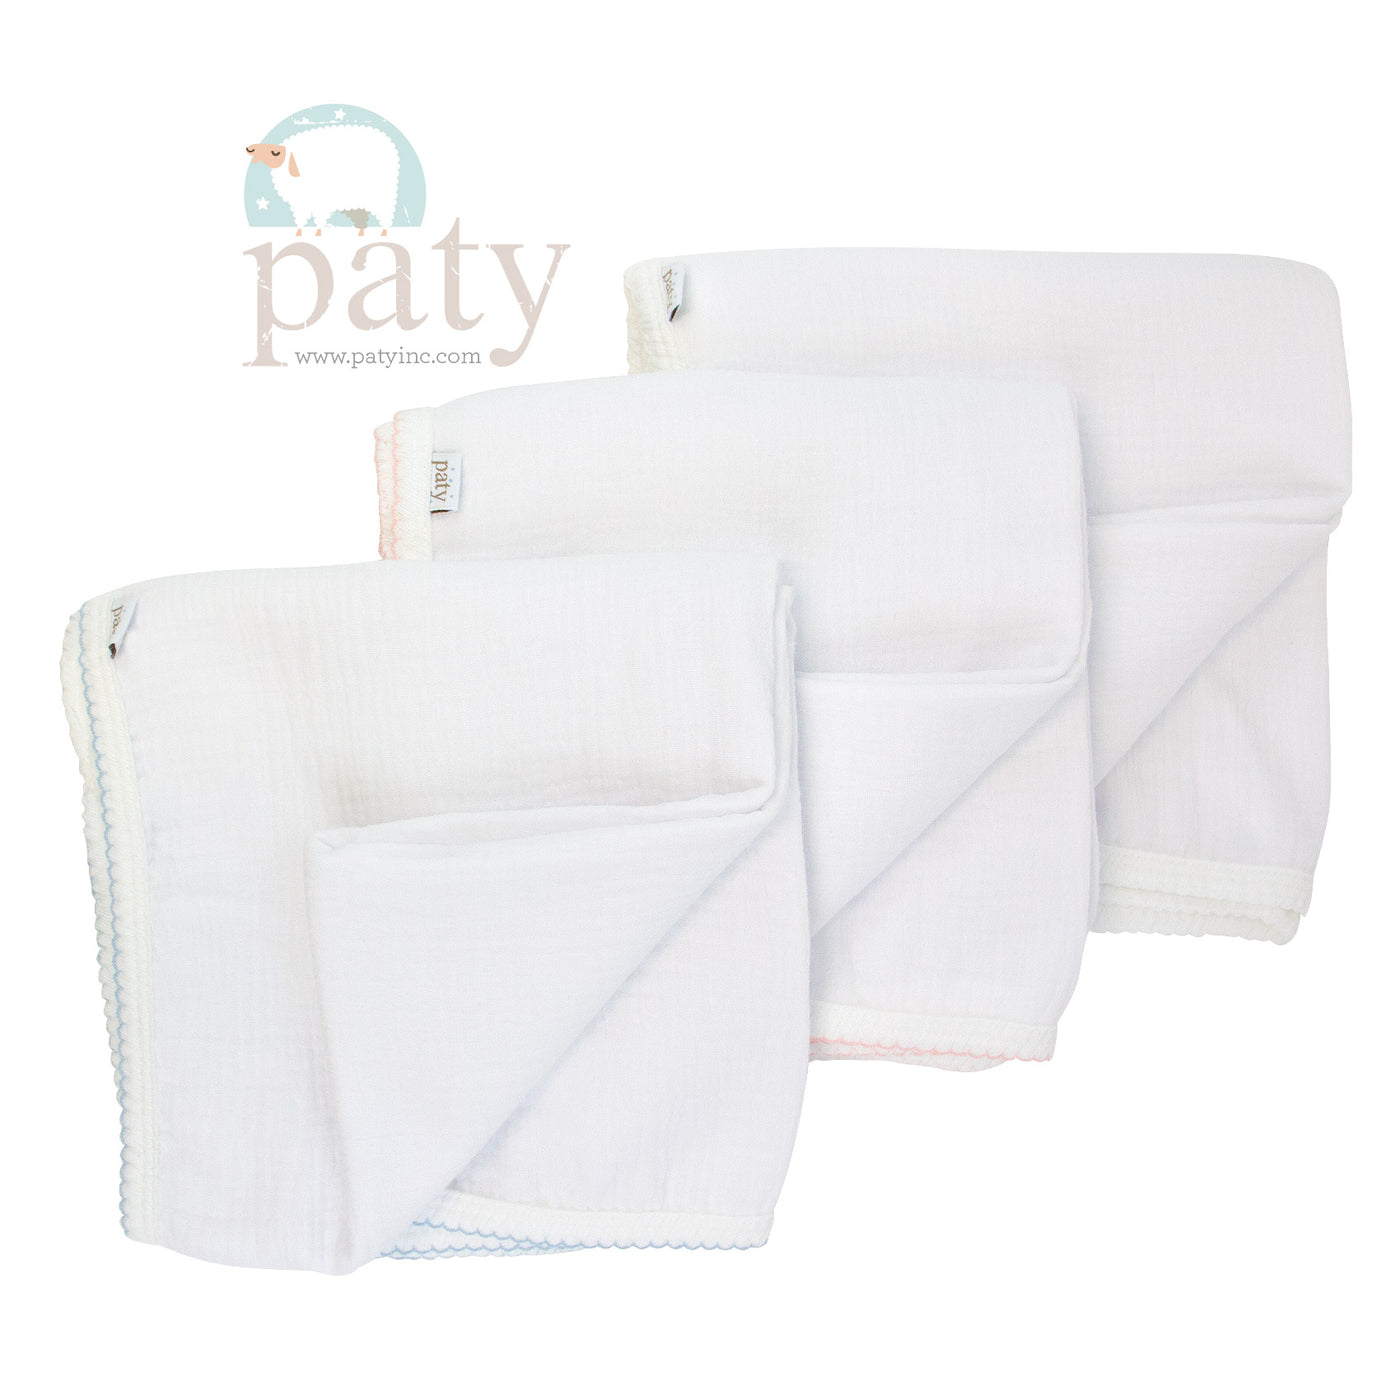 Thick Gauze Receiving Blanket - 2 Options